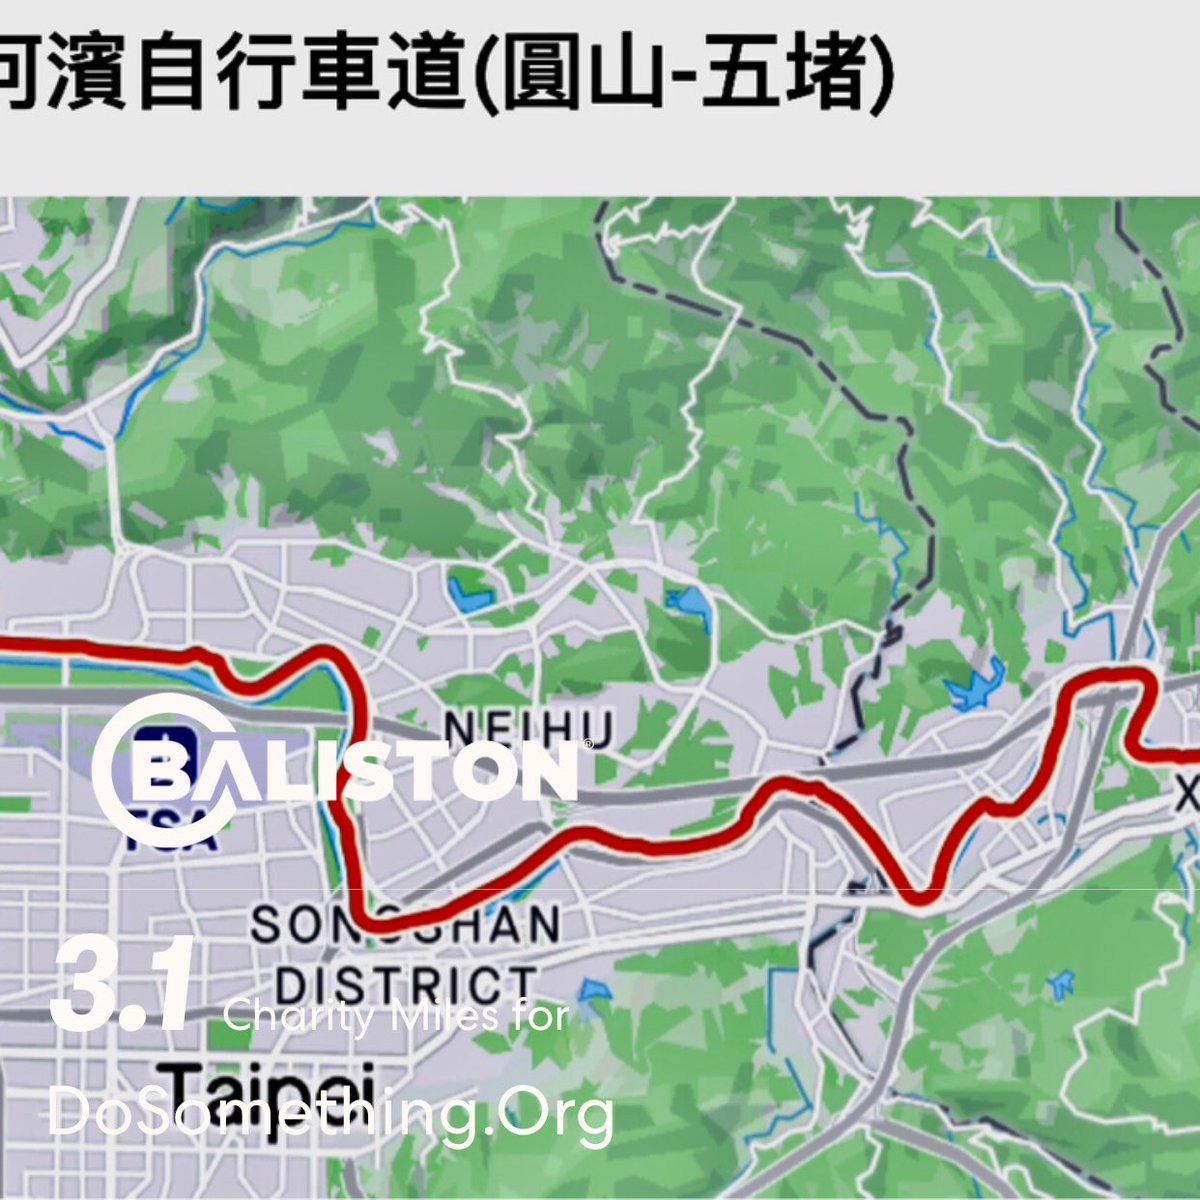 Recumbent cycled 47 minutes burning 331 calories and riding 13.6 @CharityMiles for @DoSomething #ActivePeople #Taipei